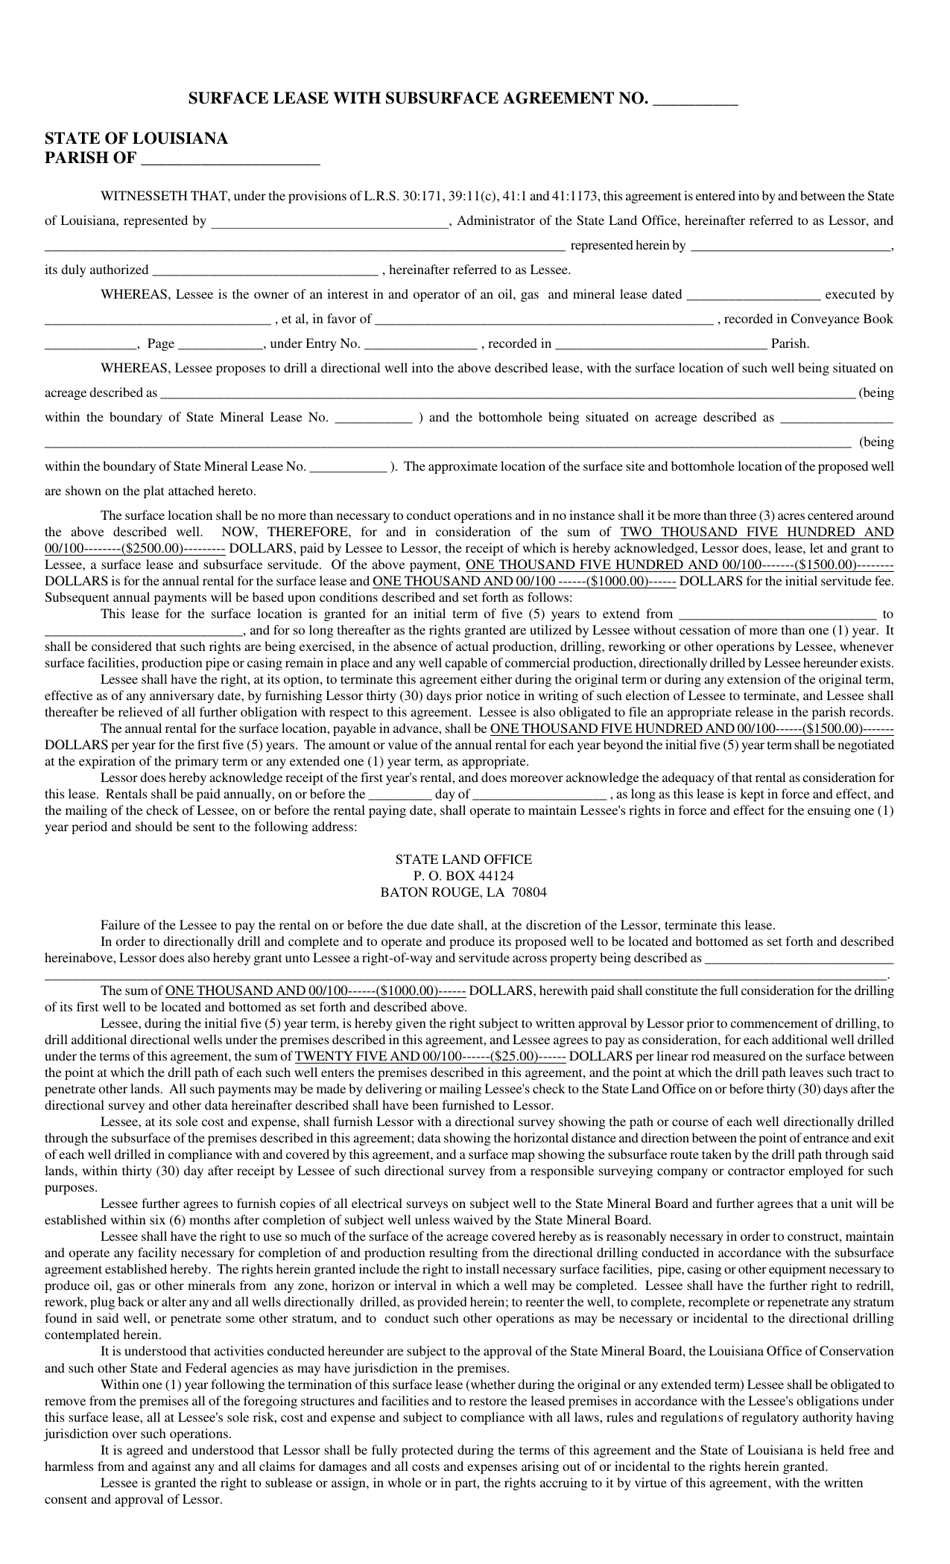 Surface Lease With Subsurface Agreement - Louisiana, Page 1